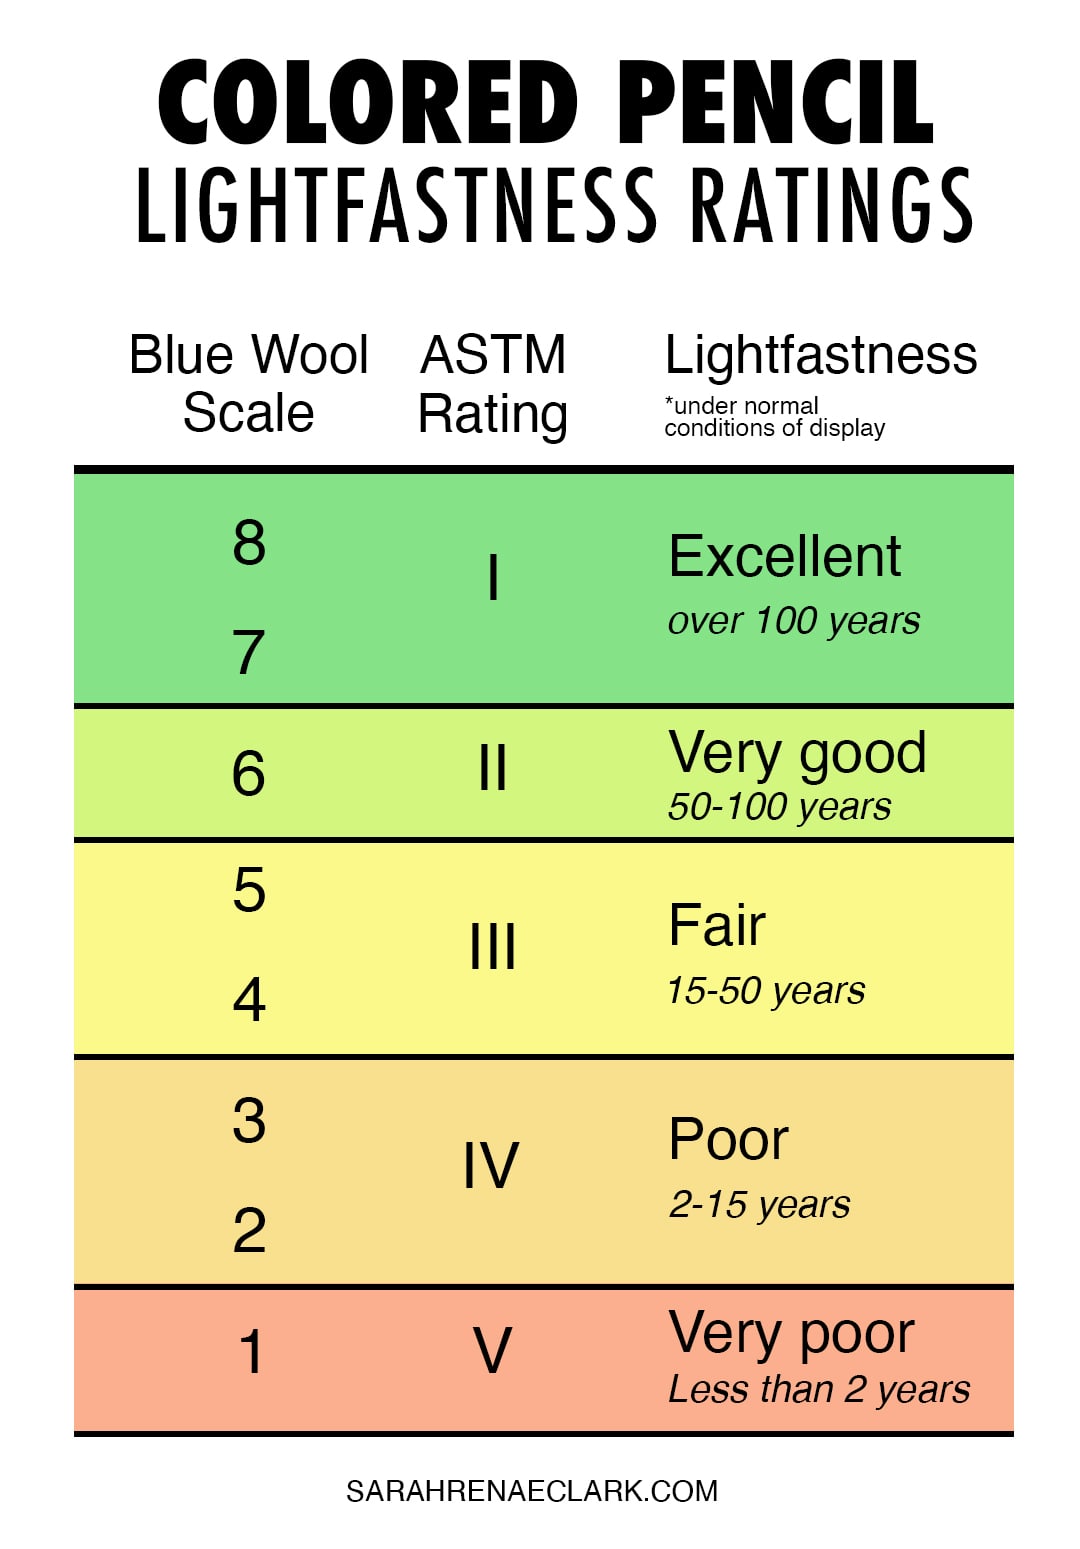 ASTM Blue Wool Colored pencil lightfastness ratings copy